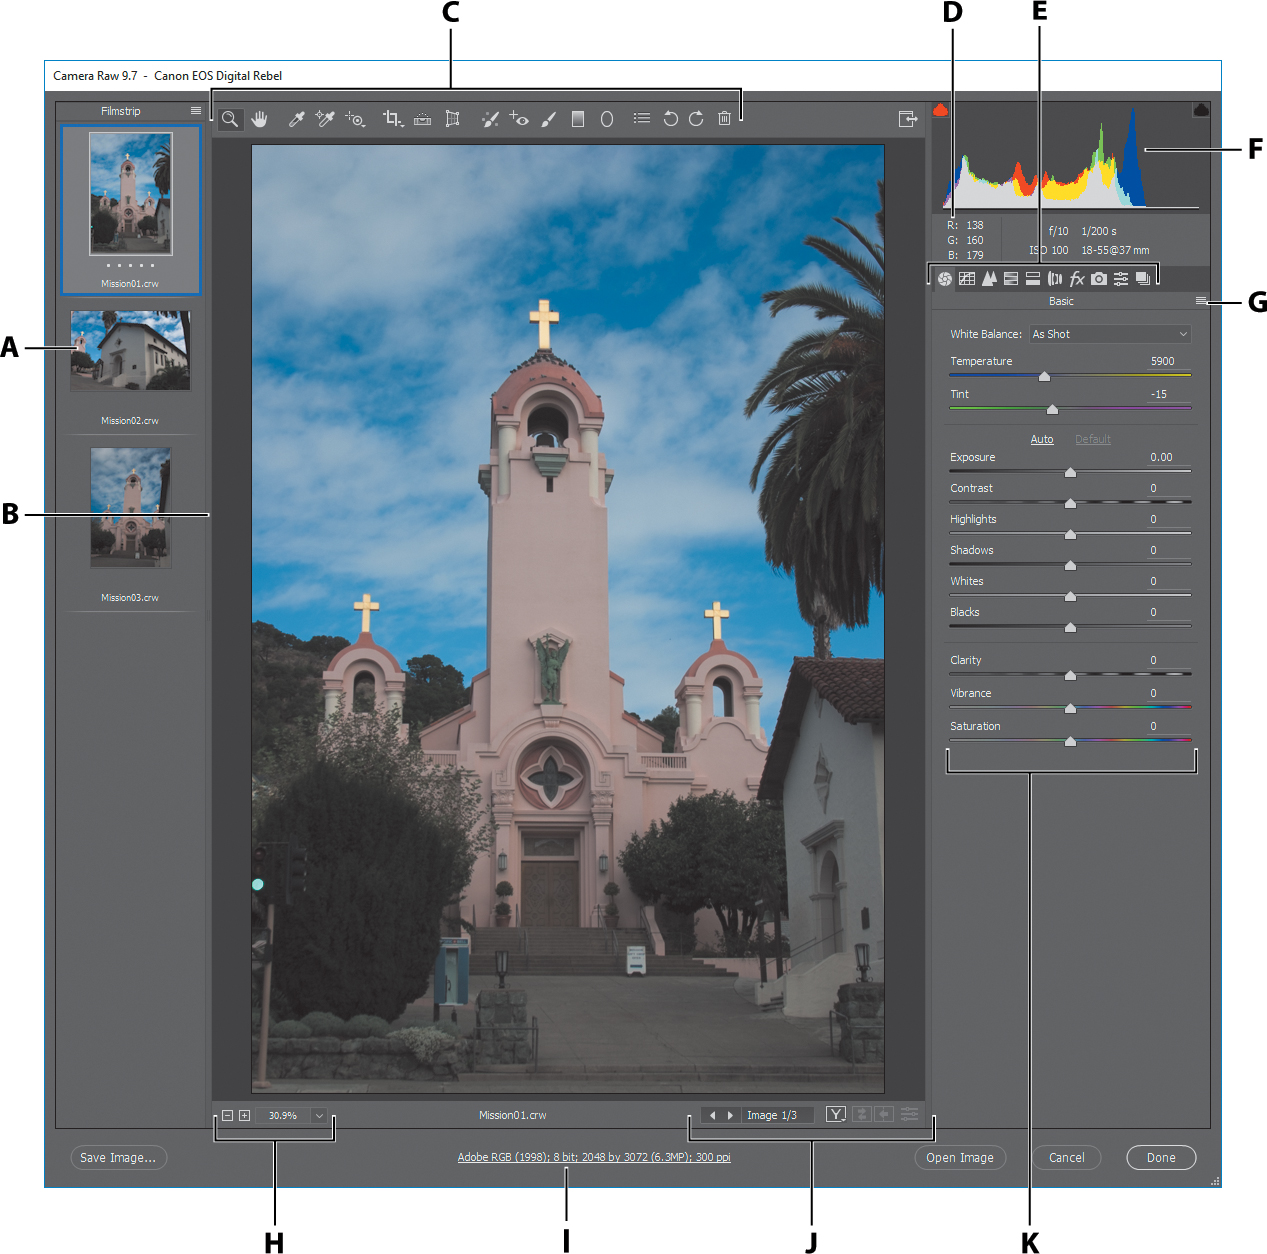 A screenshot a file opened in the "Bridge" with a photo of a church with following annotations: A. Filmstrip B. Filmstrip divider (drag to adjust) C. Toolbar D. RGB values E. Image adjustment tabs F. Histogram G. Camera Raw Settings menu H. Zoom levels I. Click to display workflow options J. Multi-image navigation controls K. Adjustment sliders